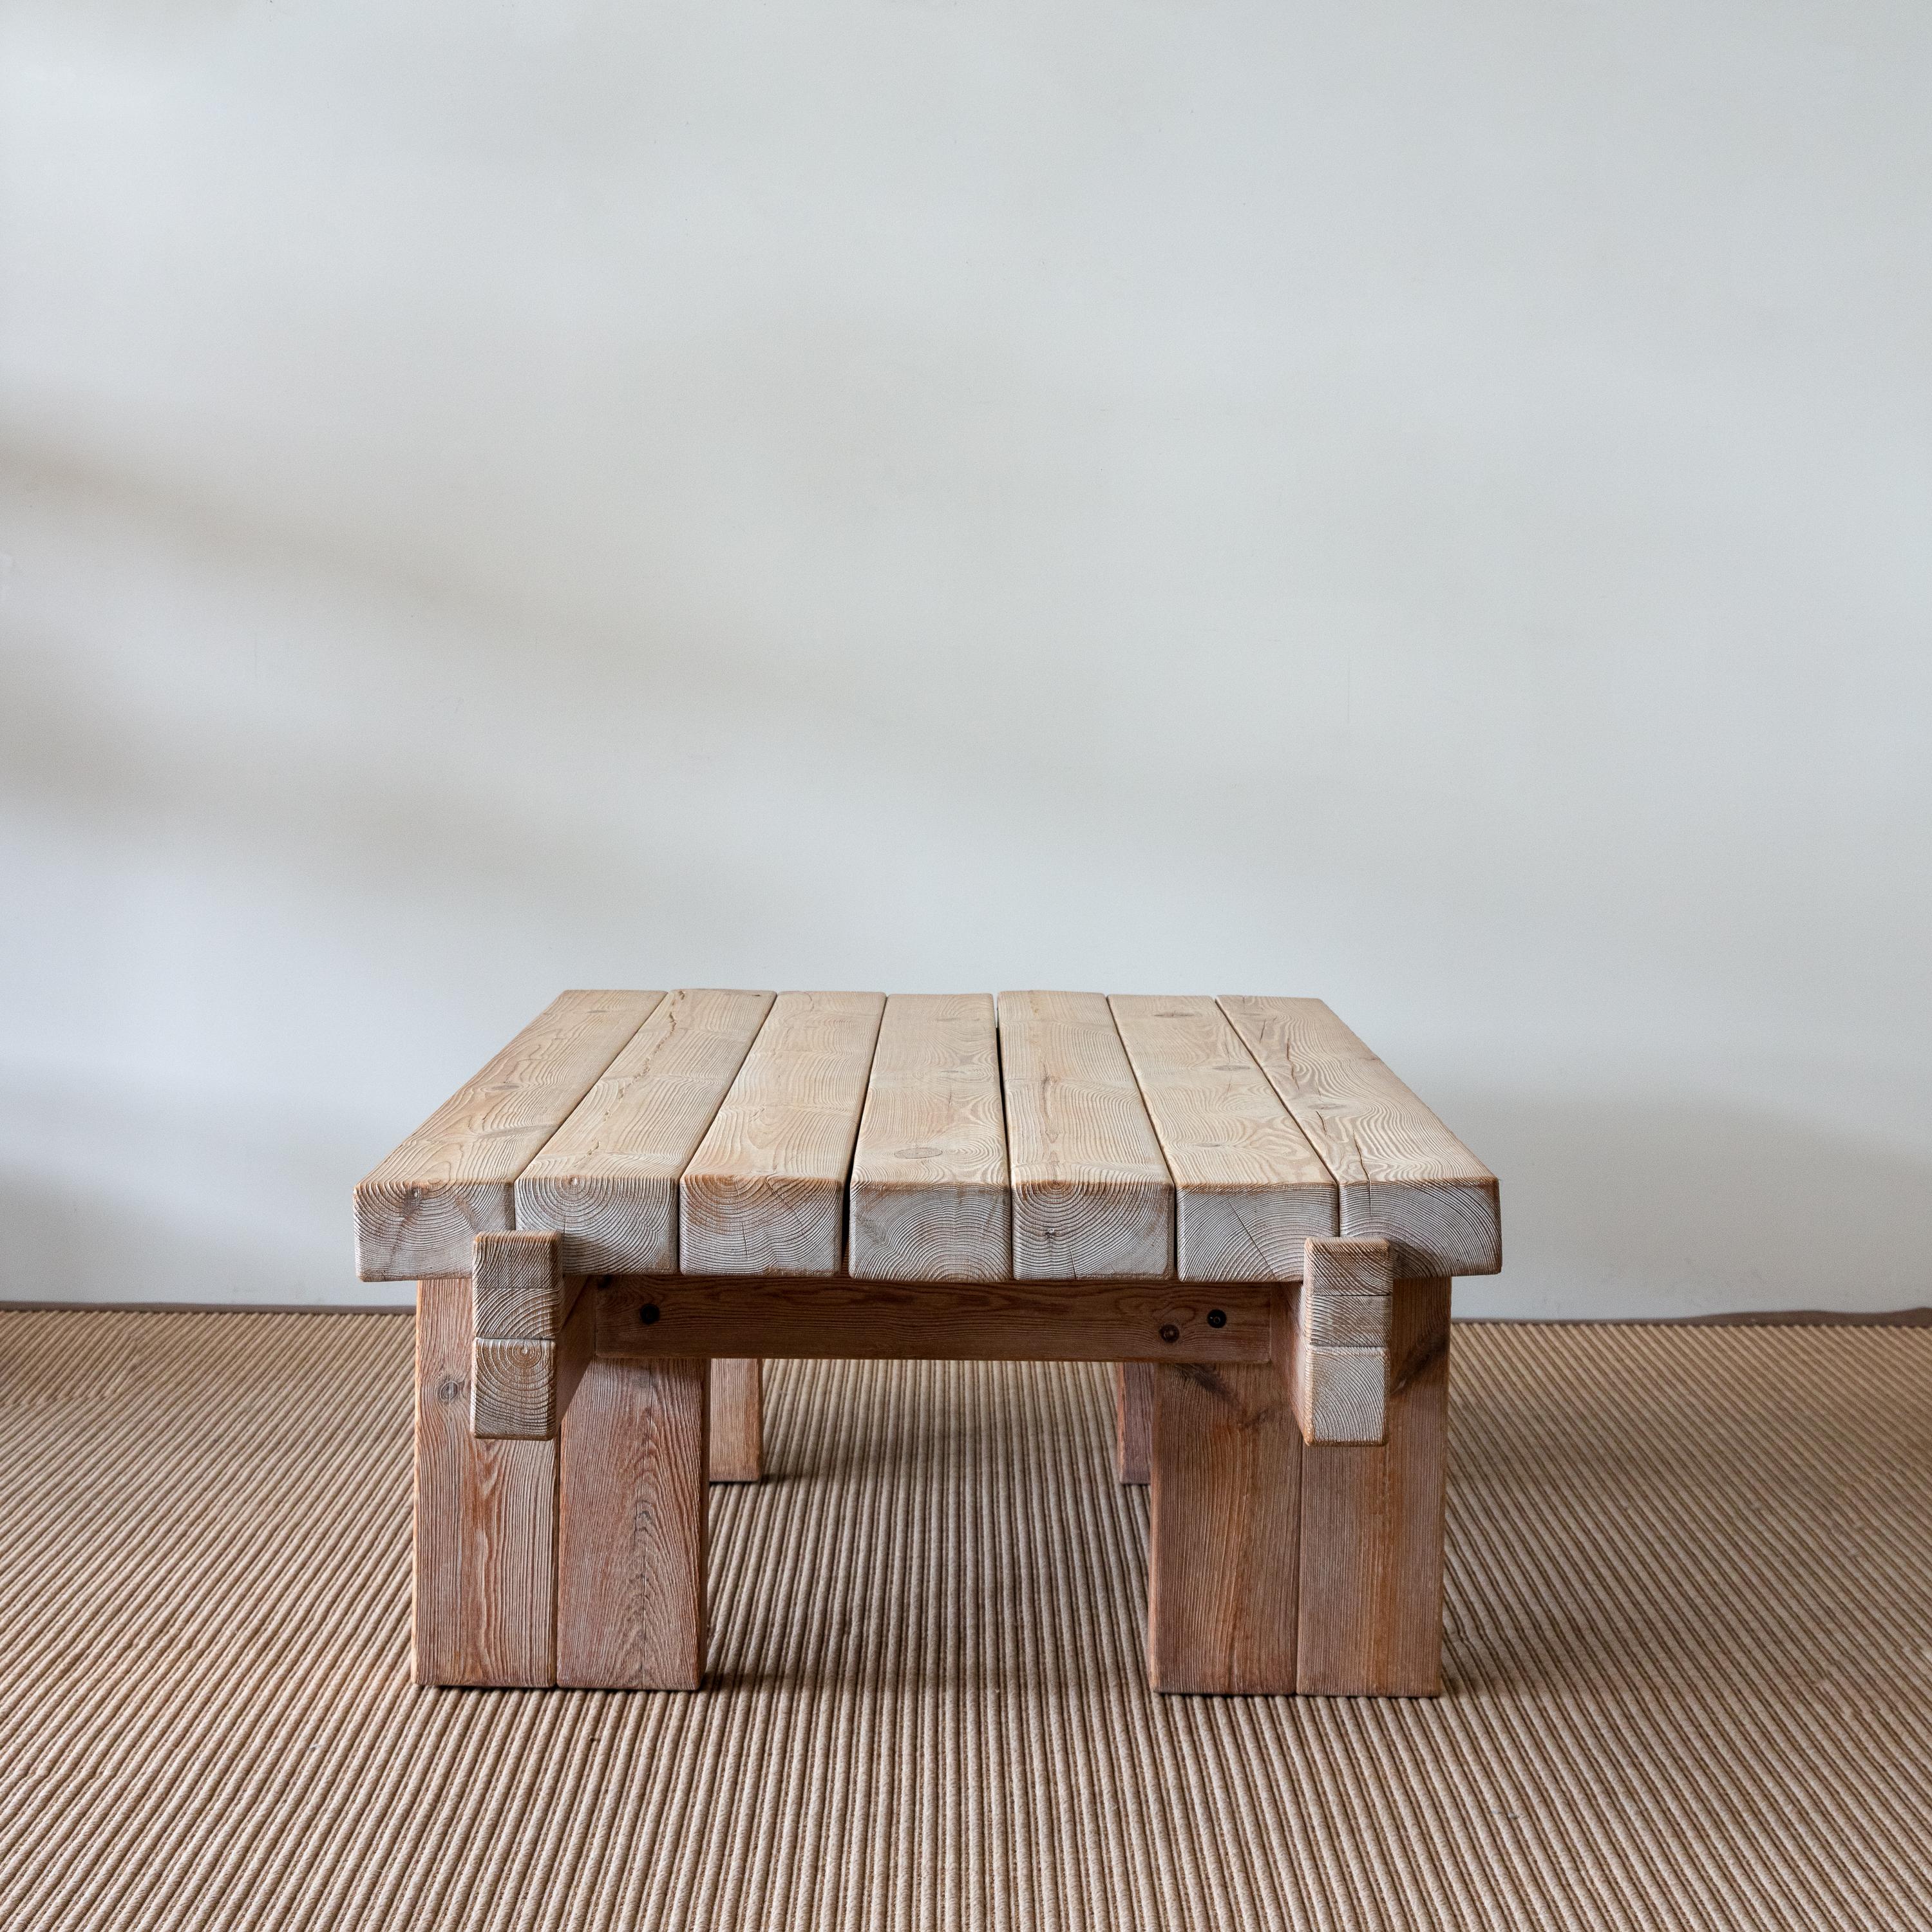  Beautiful light colored solid pine coffee table with exposed grain and joinery.